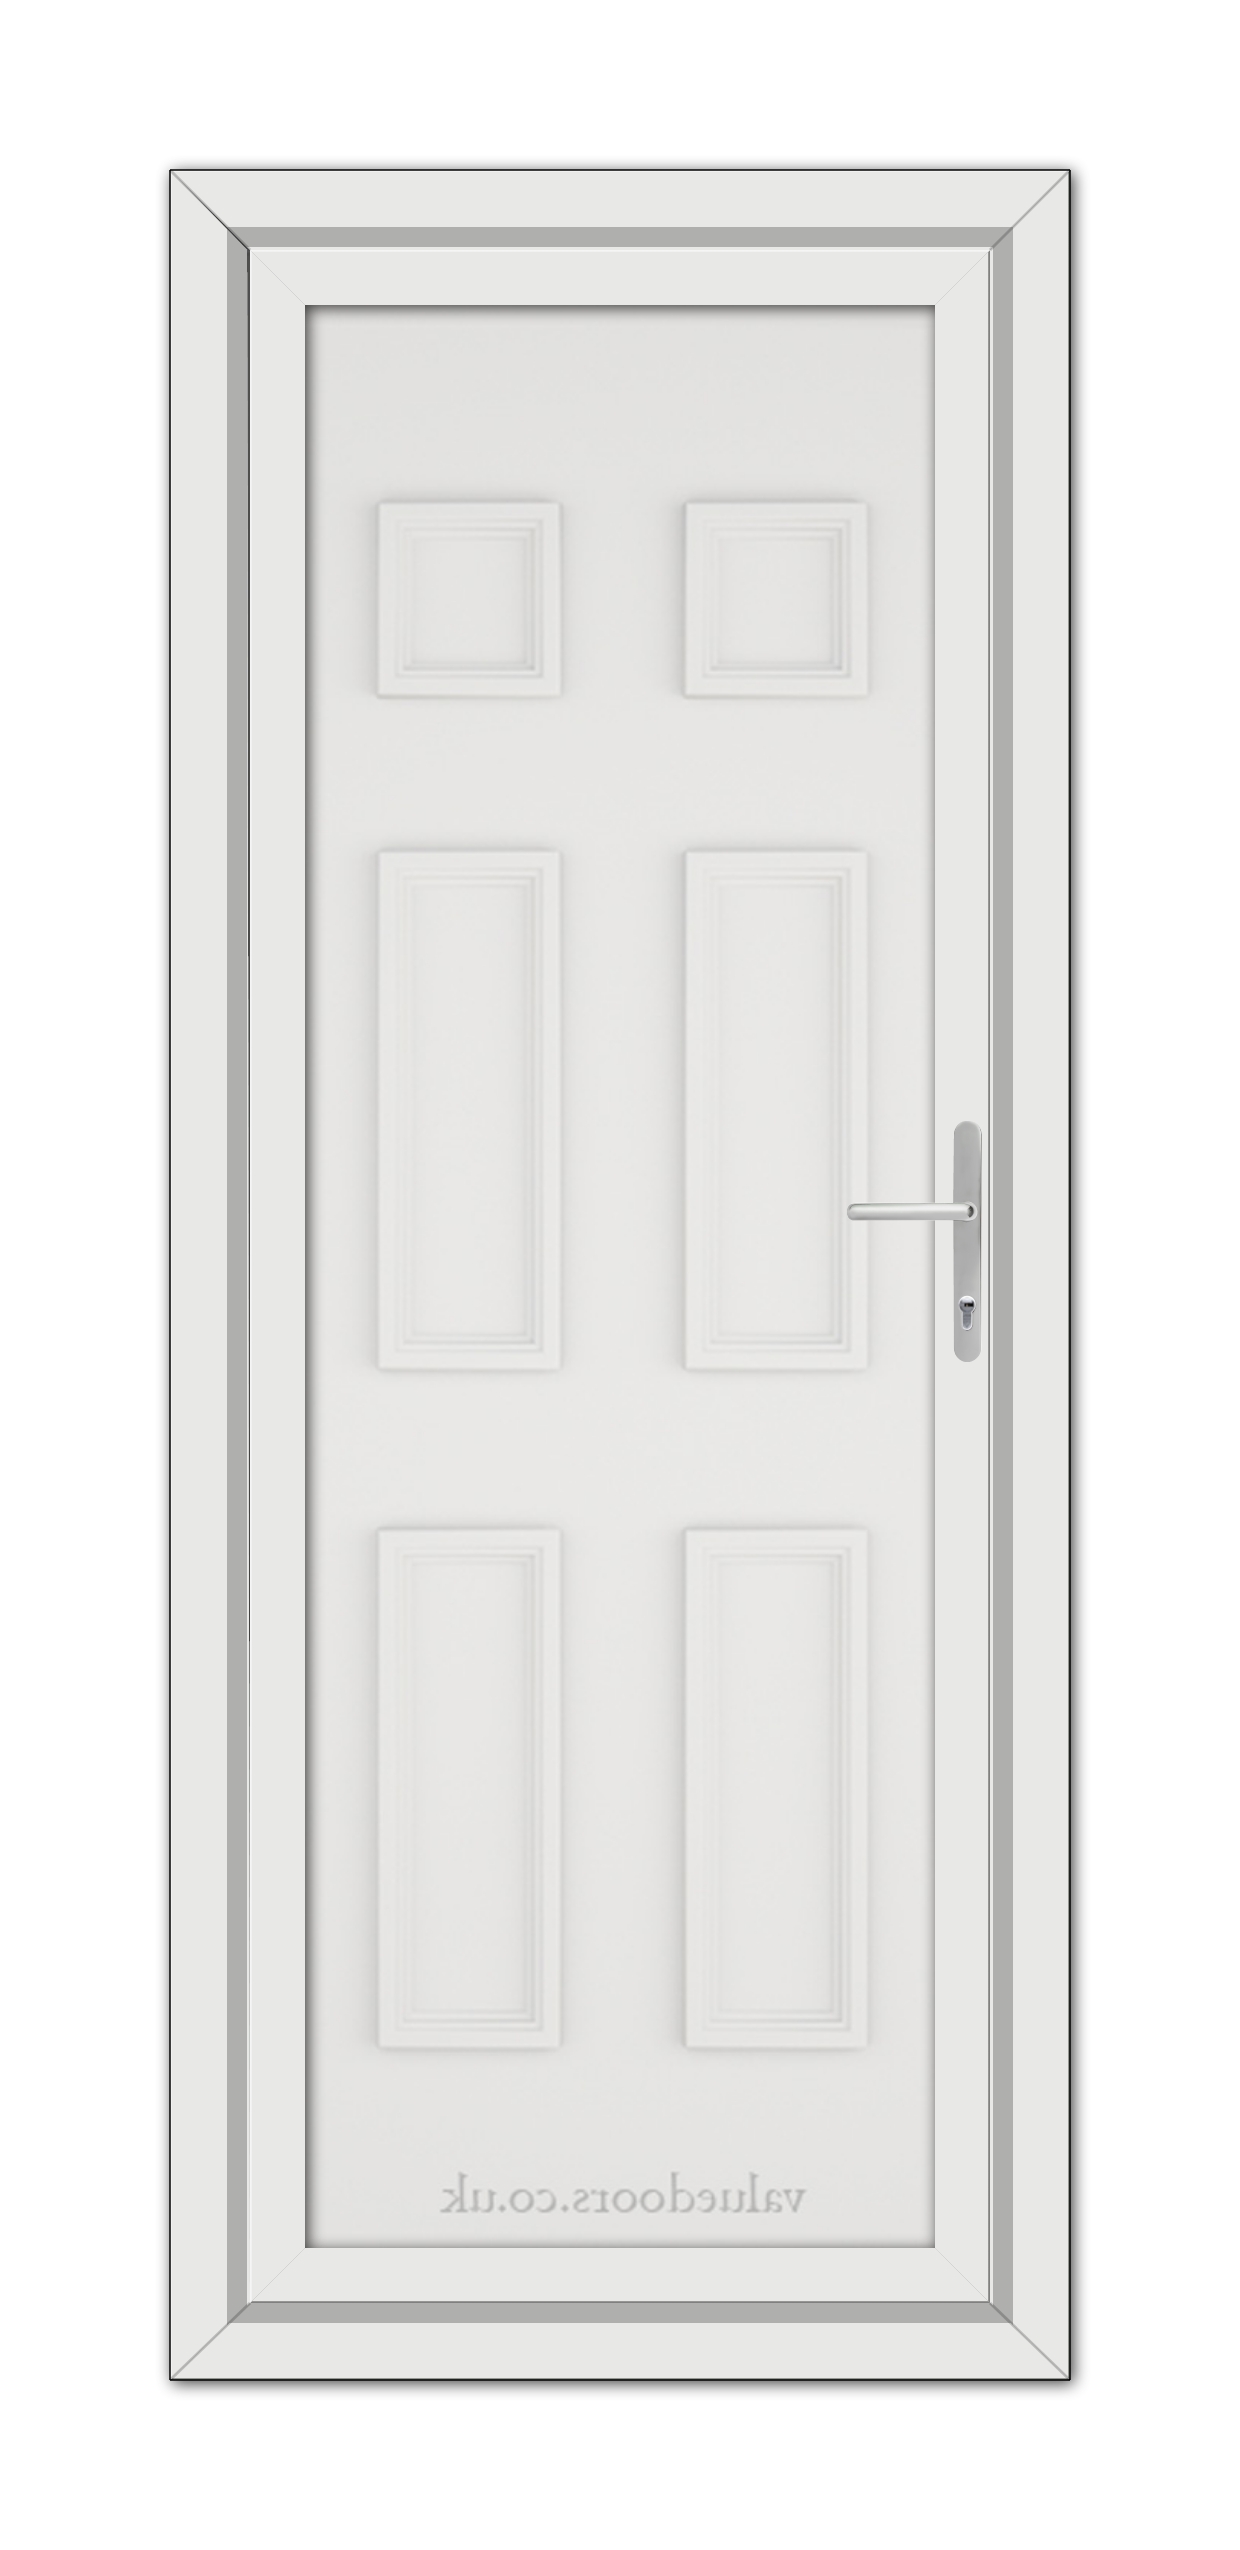 A closed White Windsor Solid uPVC door with six raised panels and a metal handle, set within a simple frame.